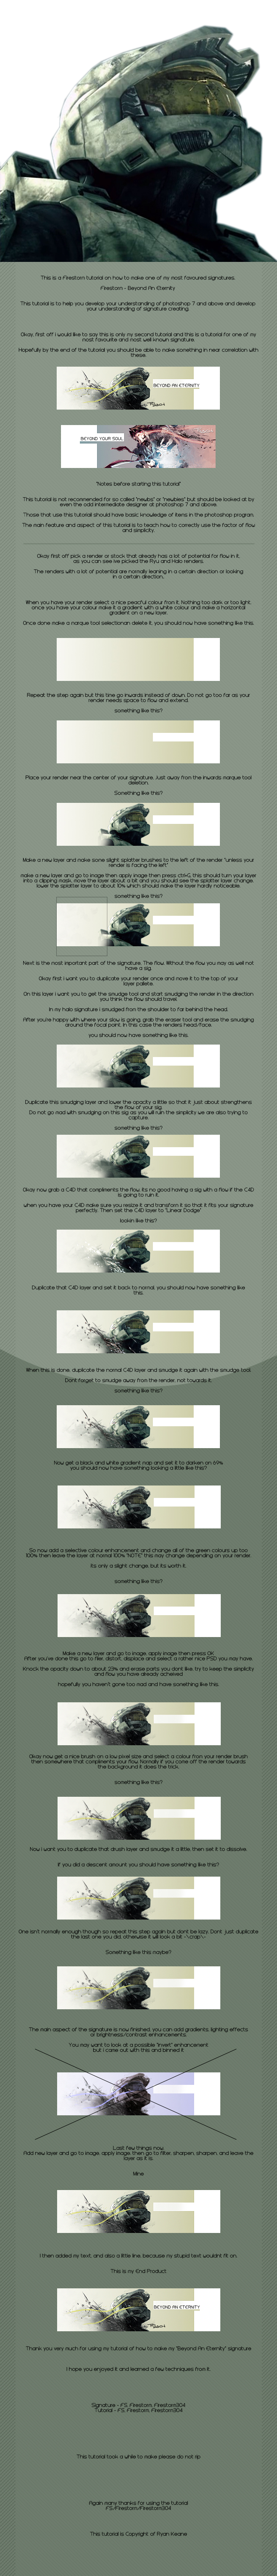 Halo_Full_Sig_Tutorial_by_theHalogen